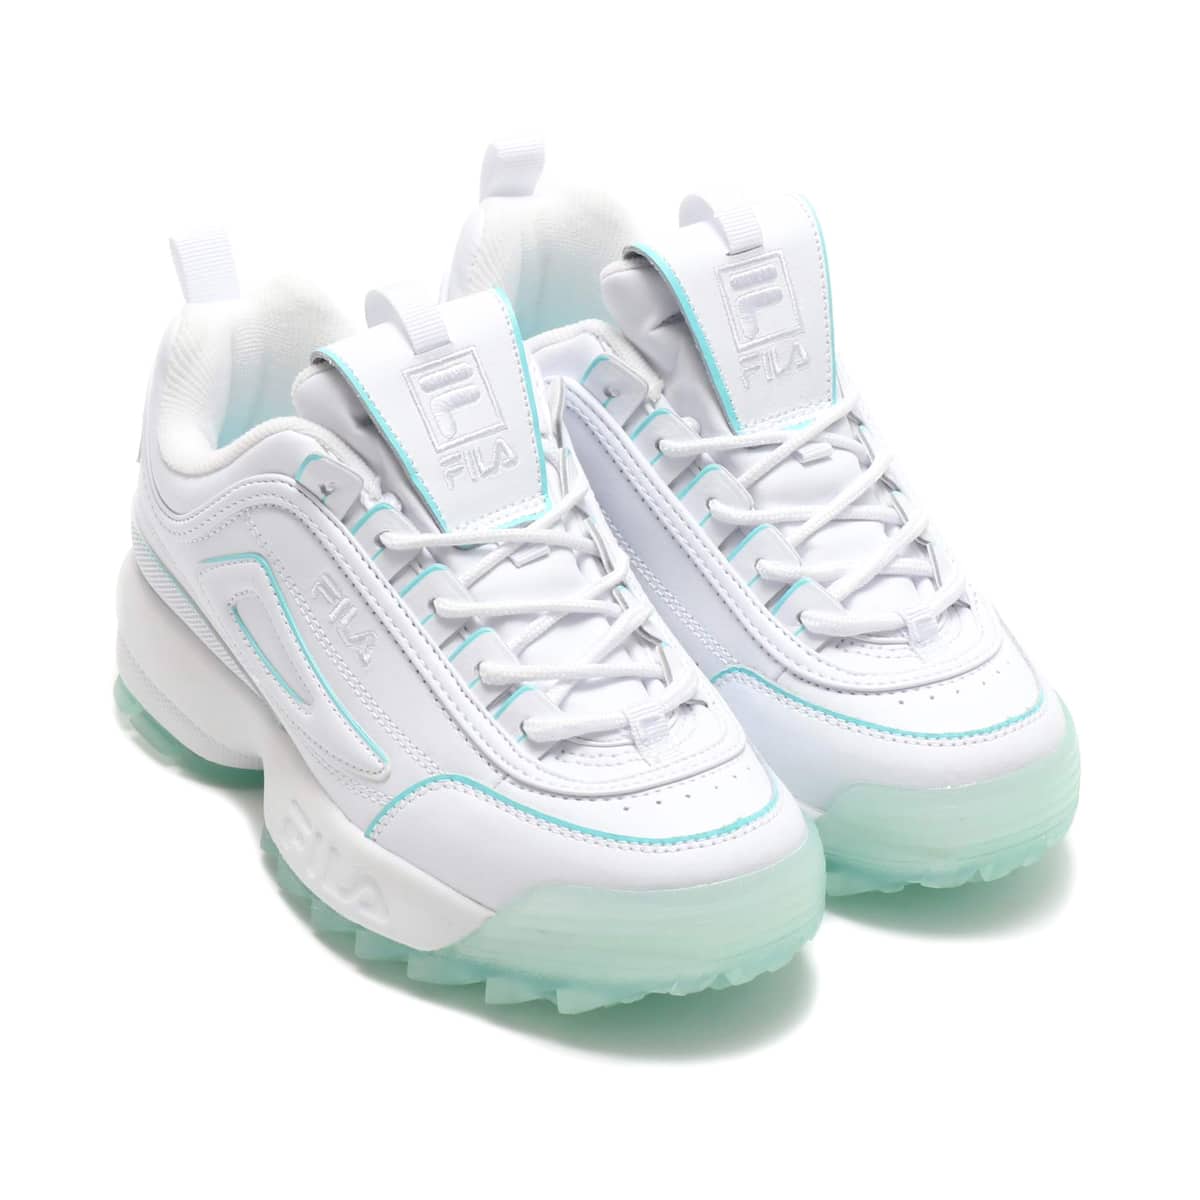 FILA DISRUPTOR 2 ICE WOMEN'S WH/WH/A.BL 19FW-I_photo_large